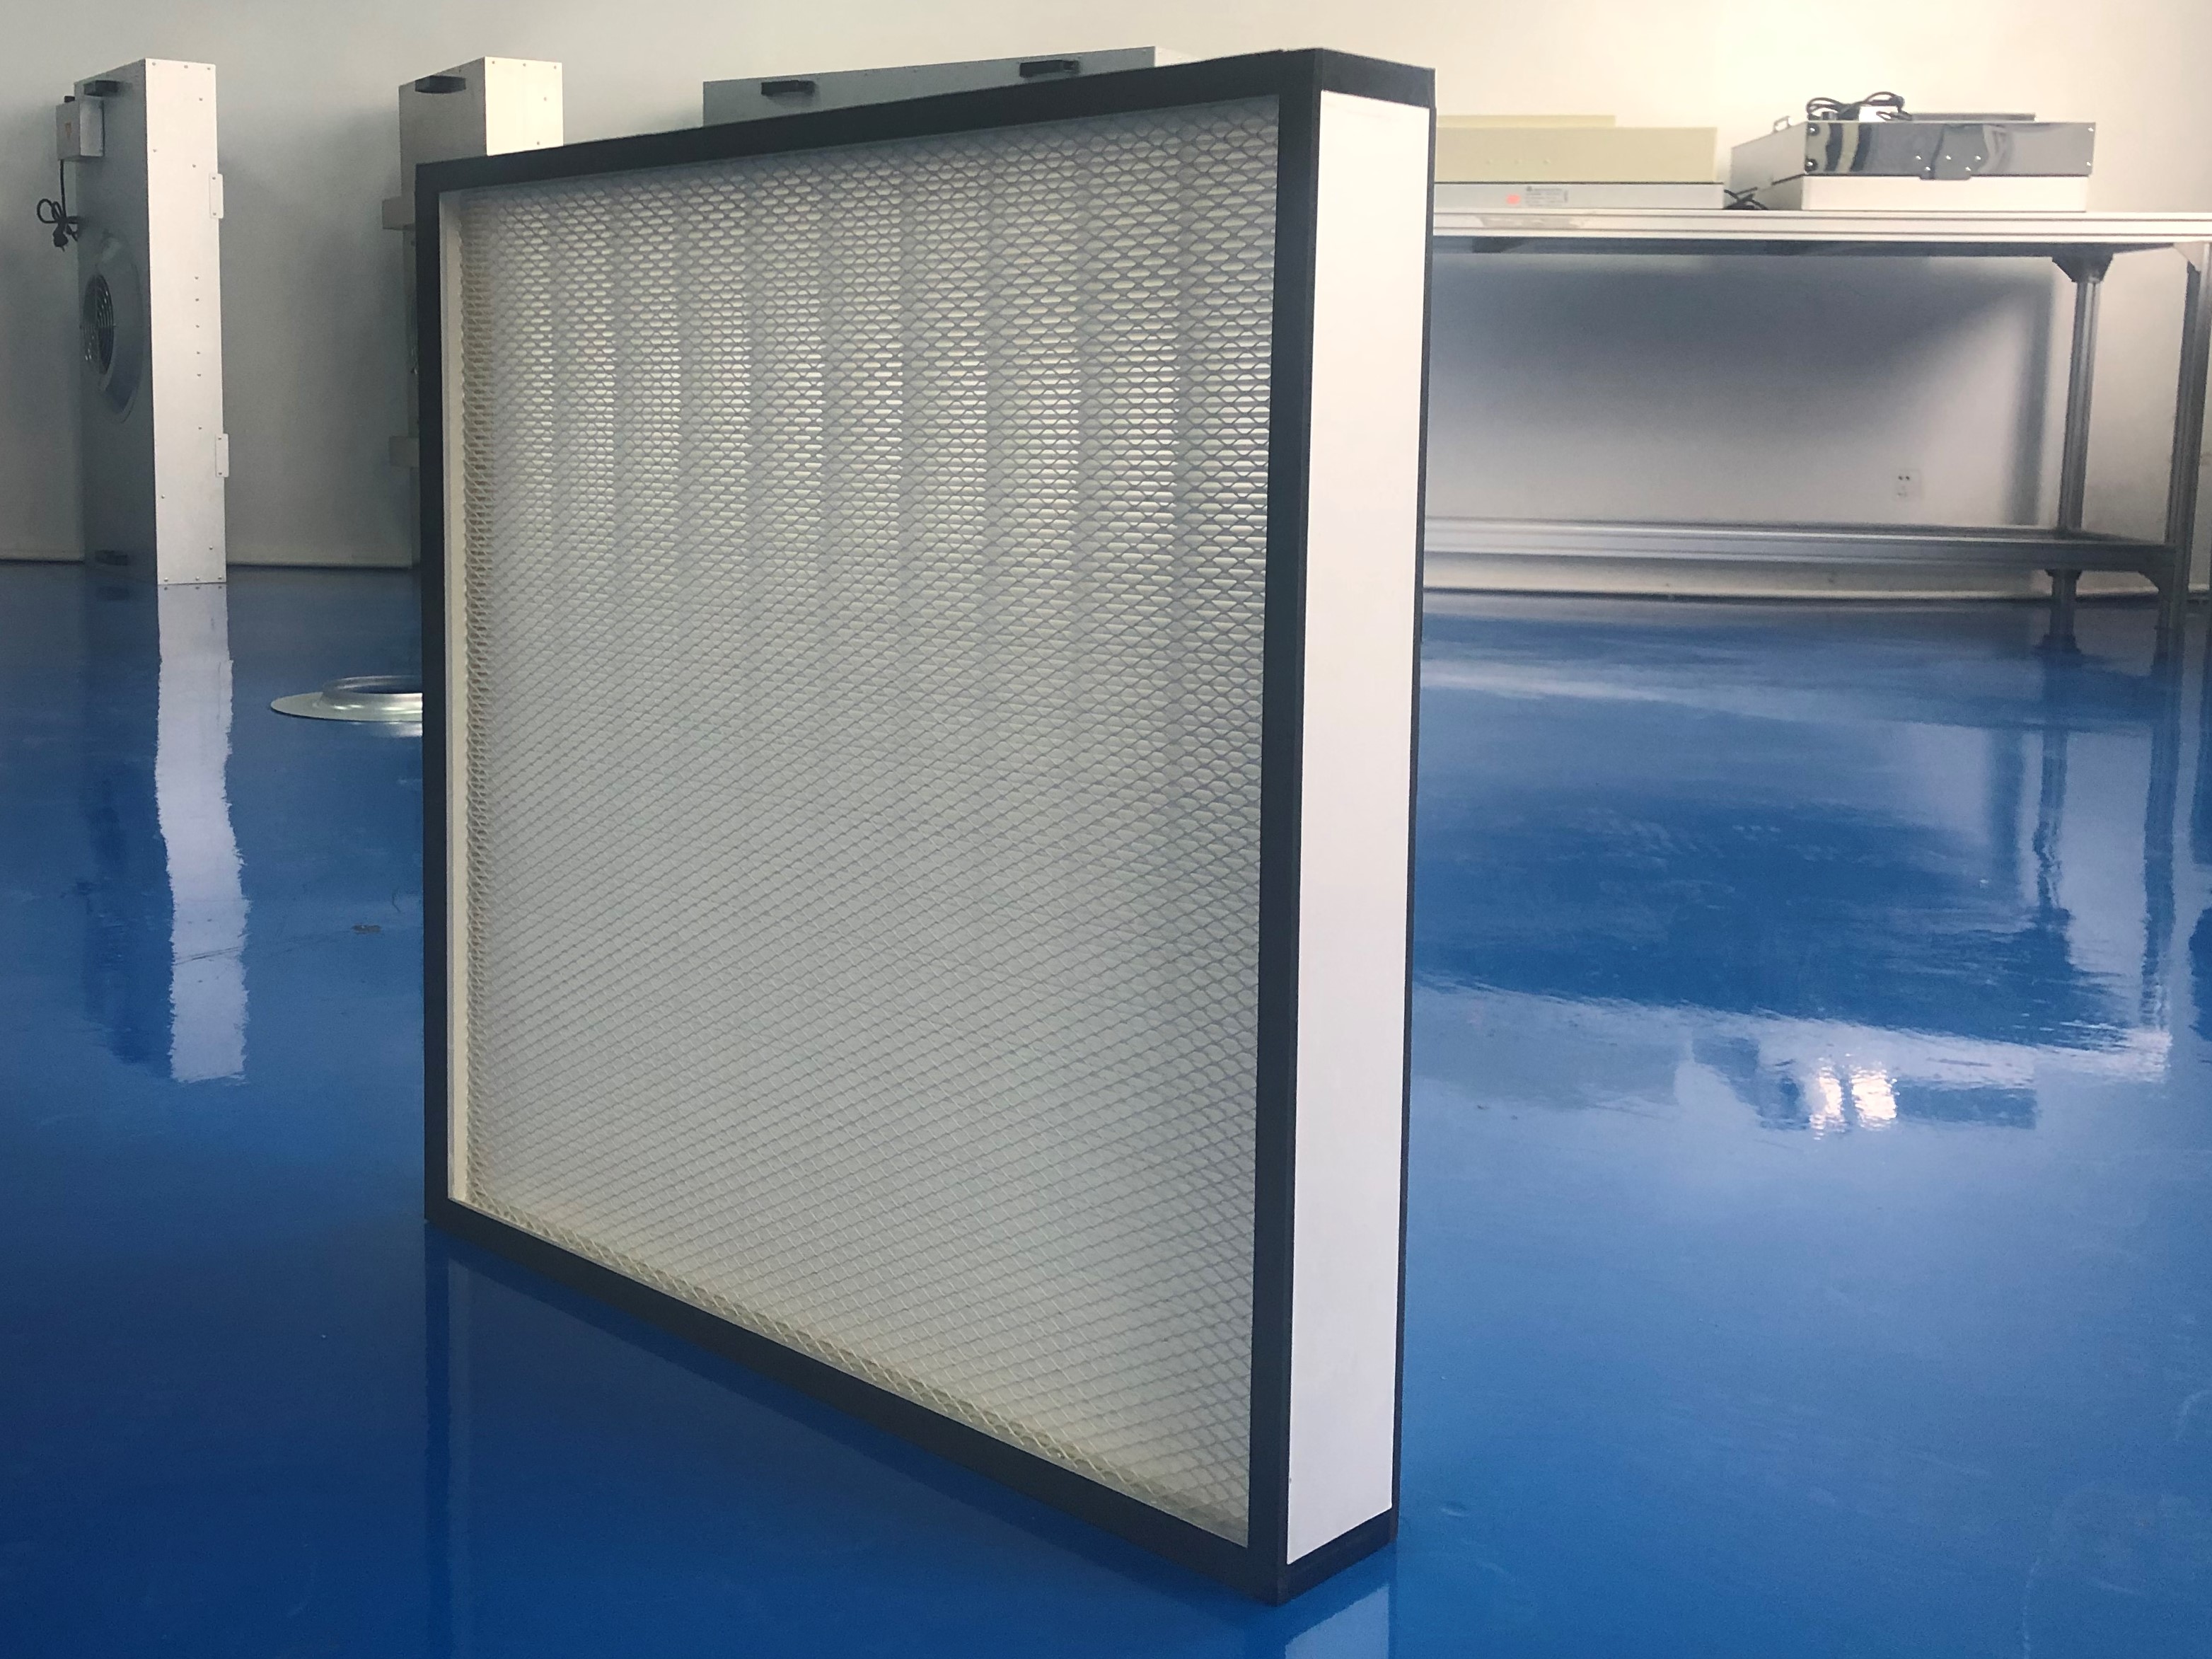 BRIEF INTRODUCTION TO CLEAN ROOM FILTER